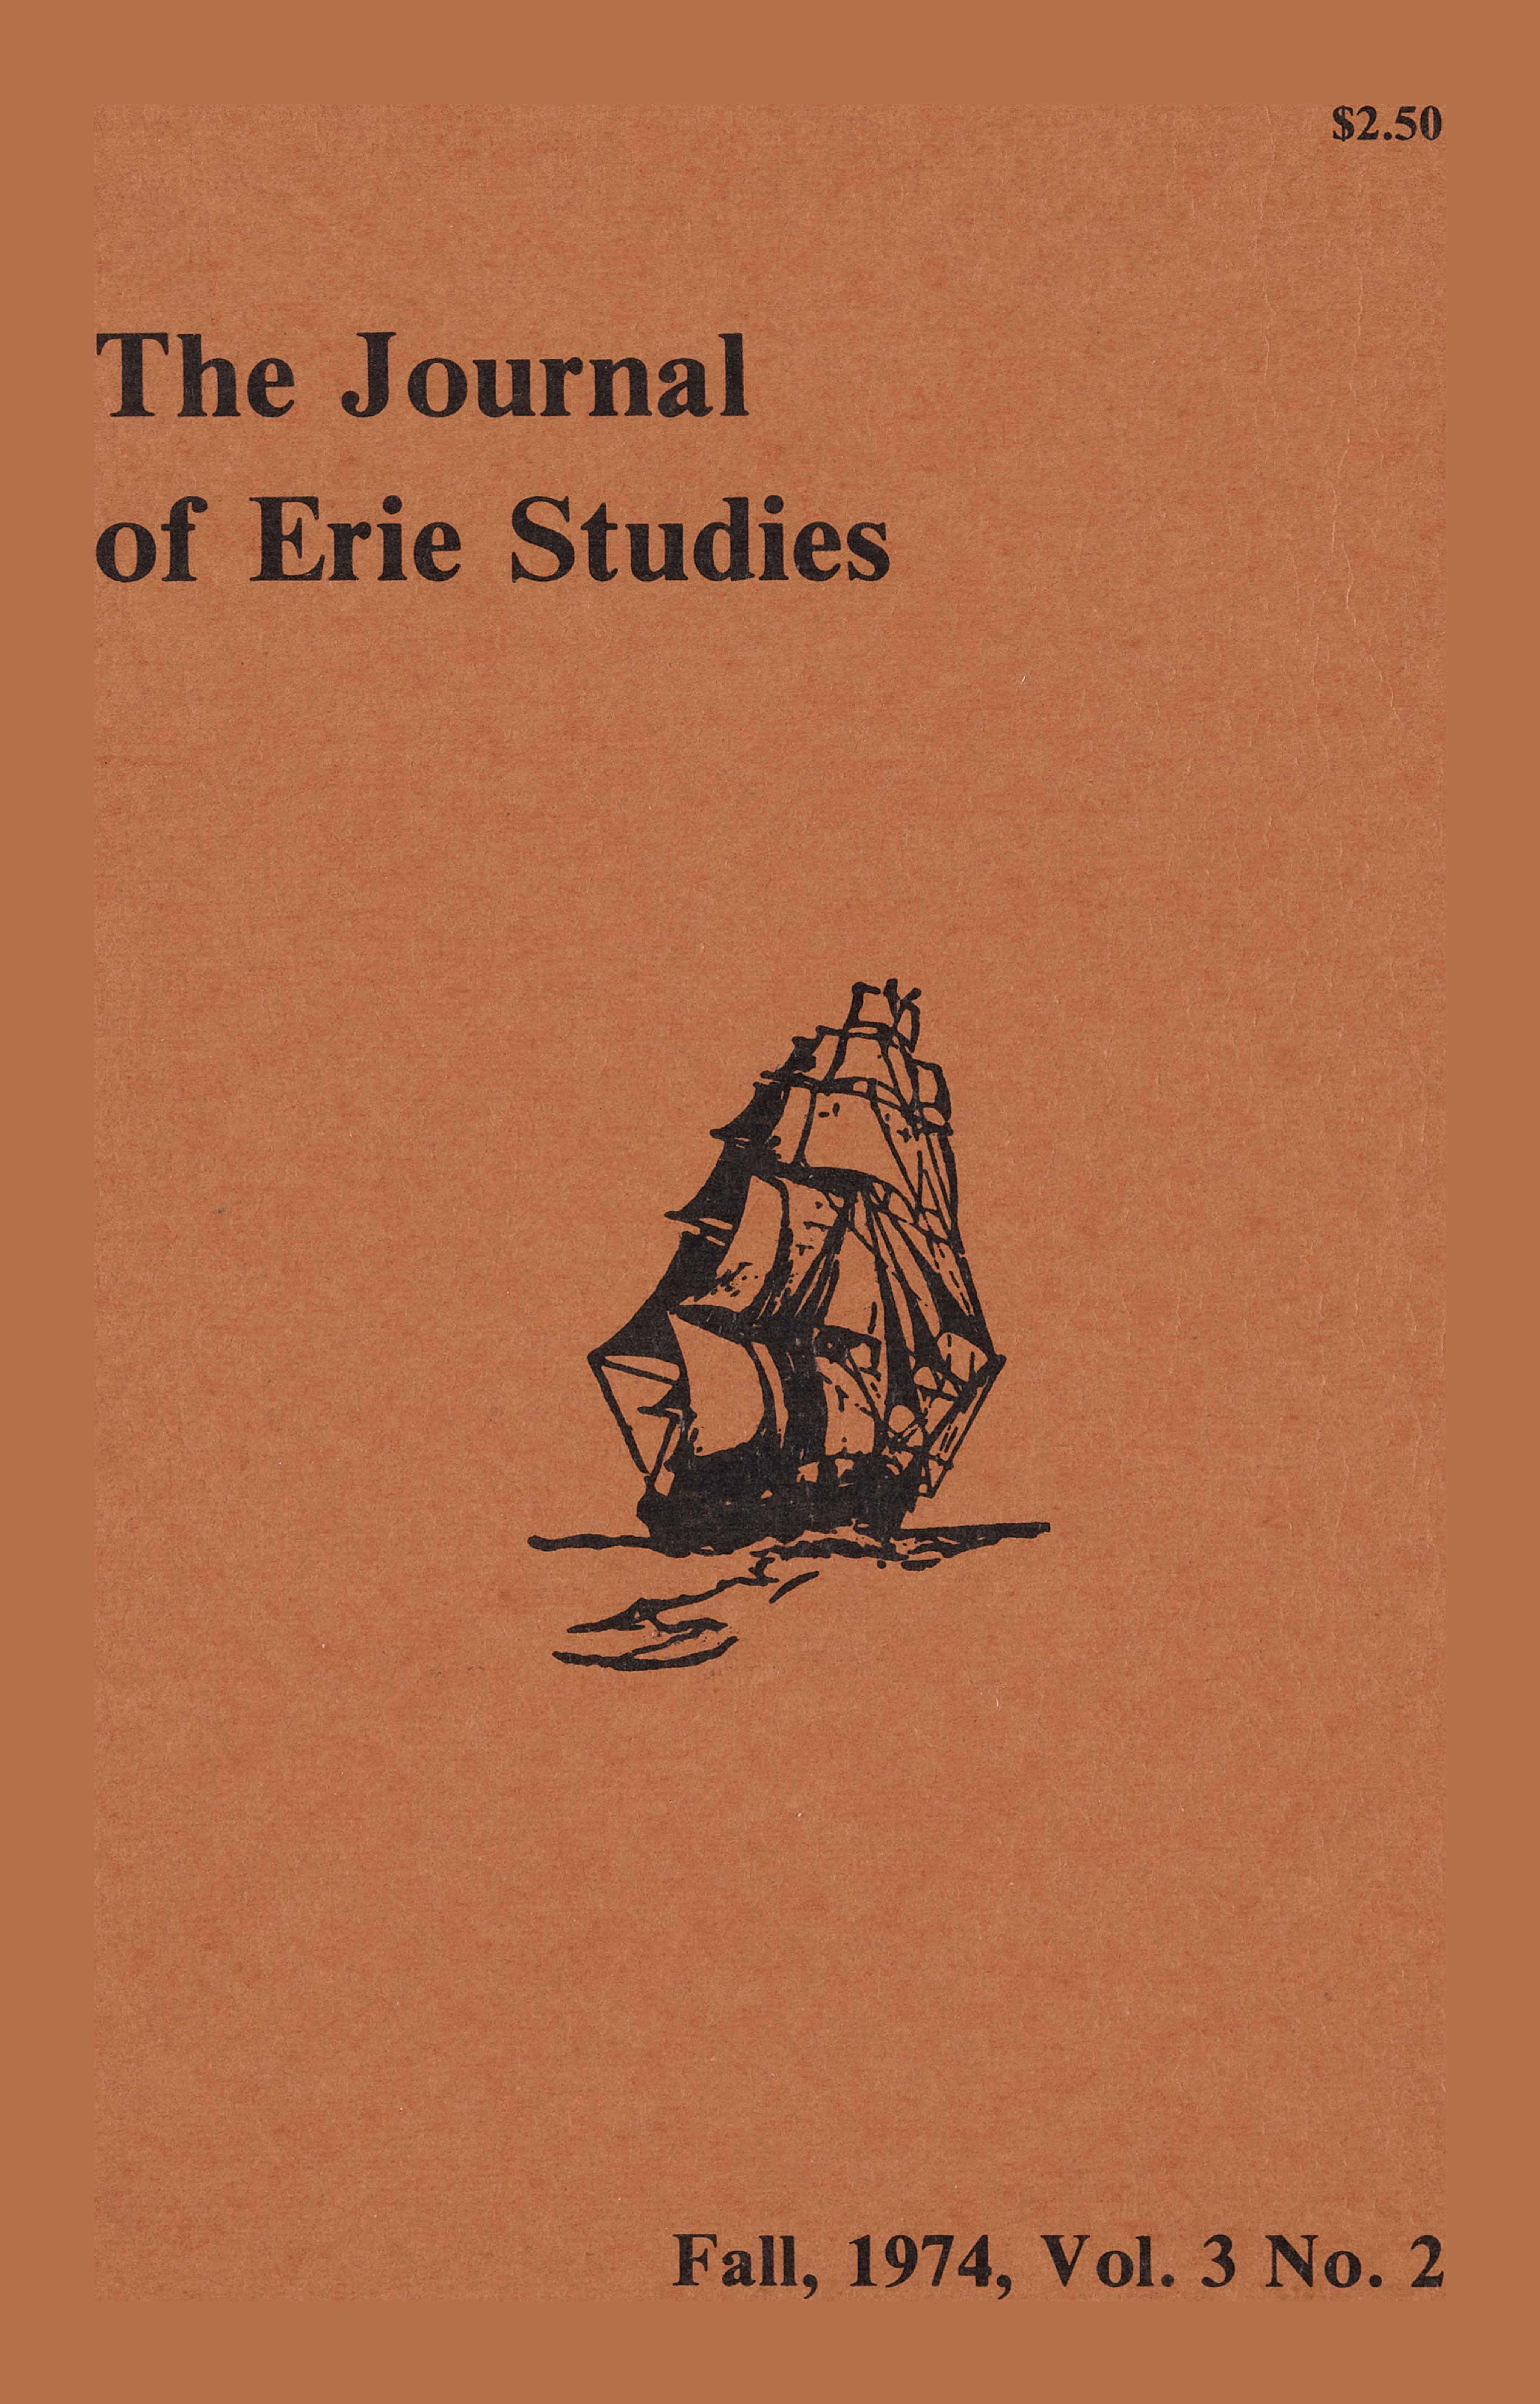 Cover of the fall 1974 issue of The Journal of Erie Studies.